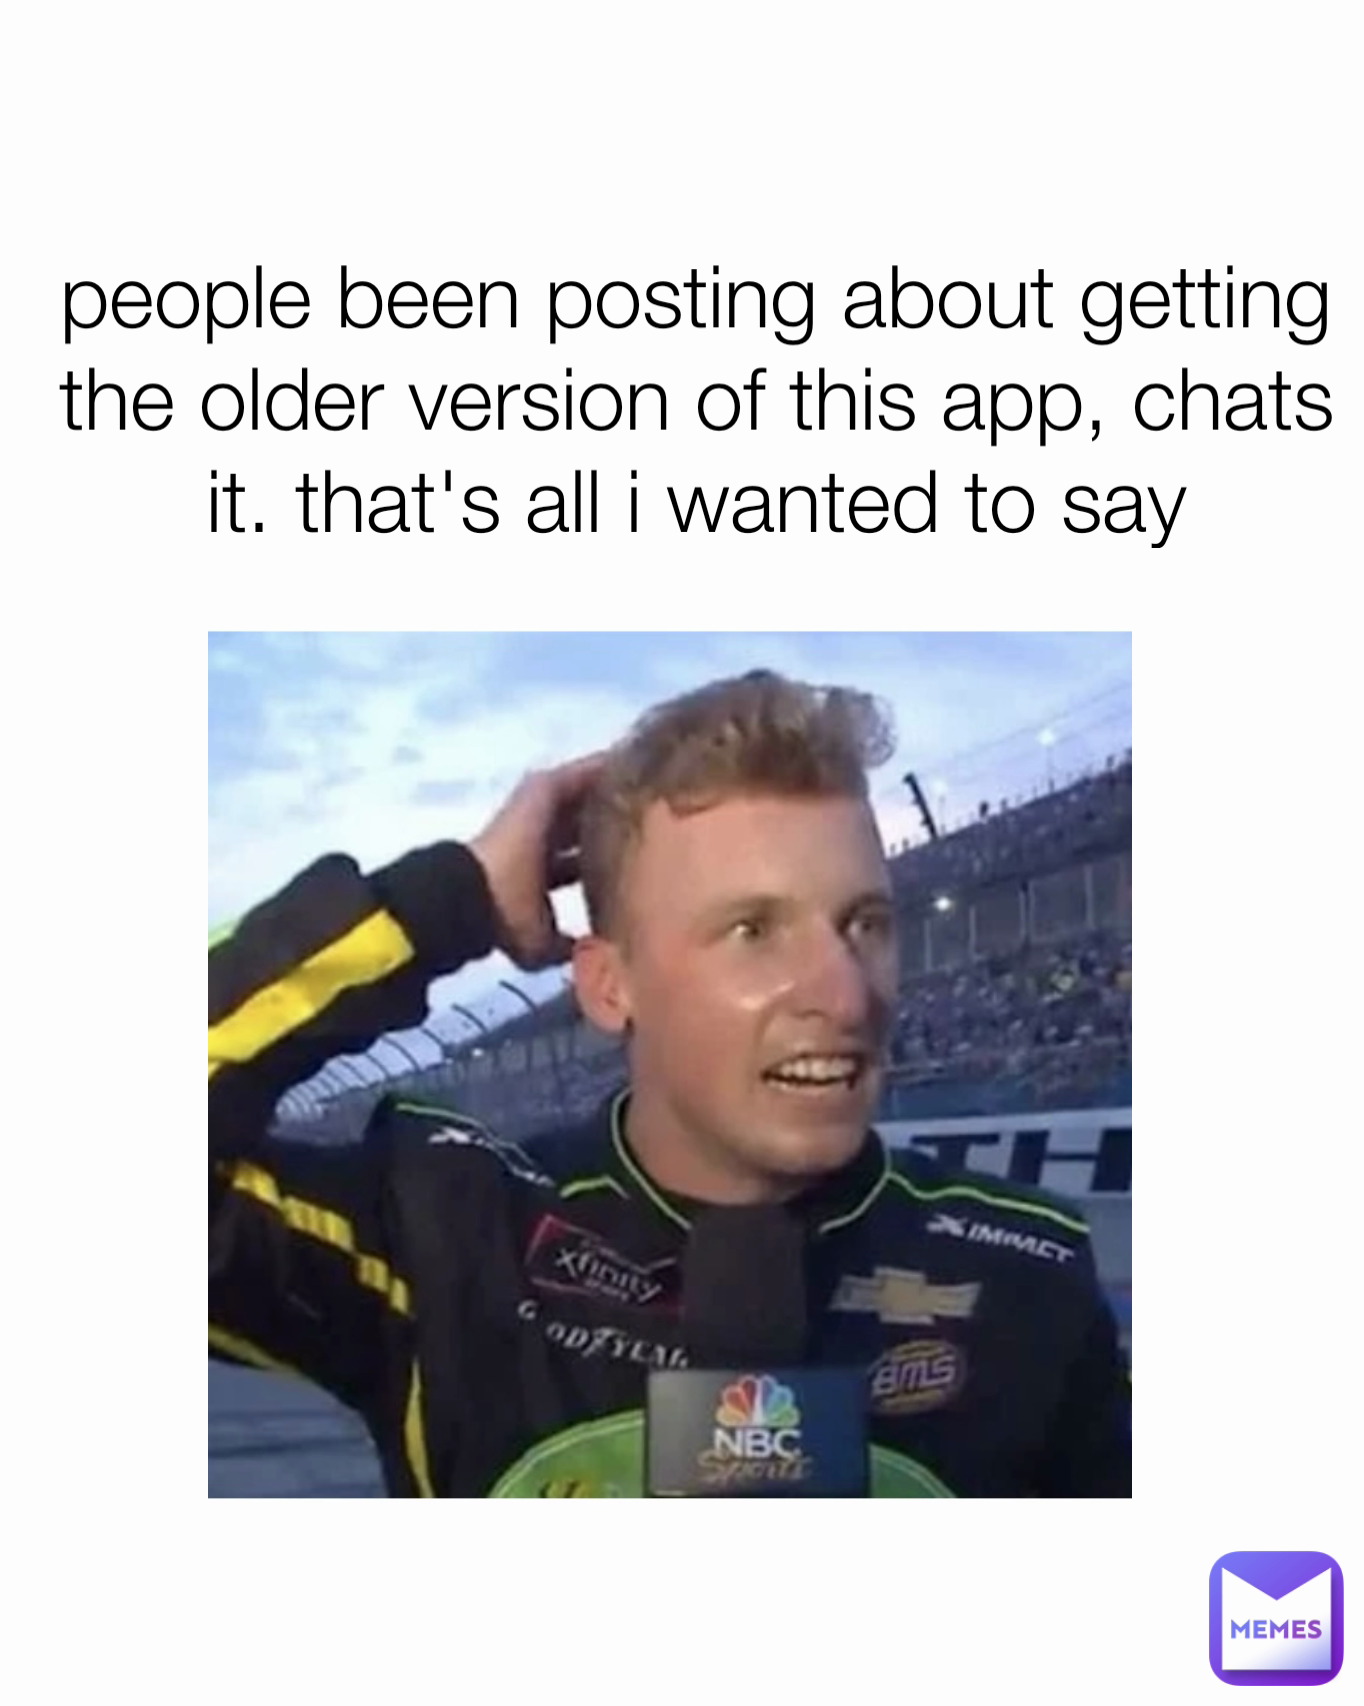 people been posting about getting the older version of this app, chats it. that's all i wanted to say